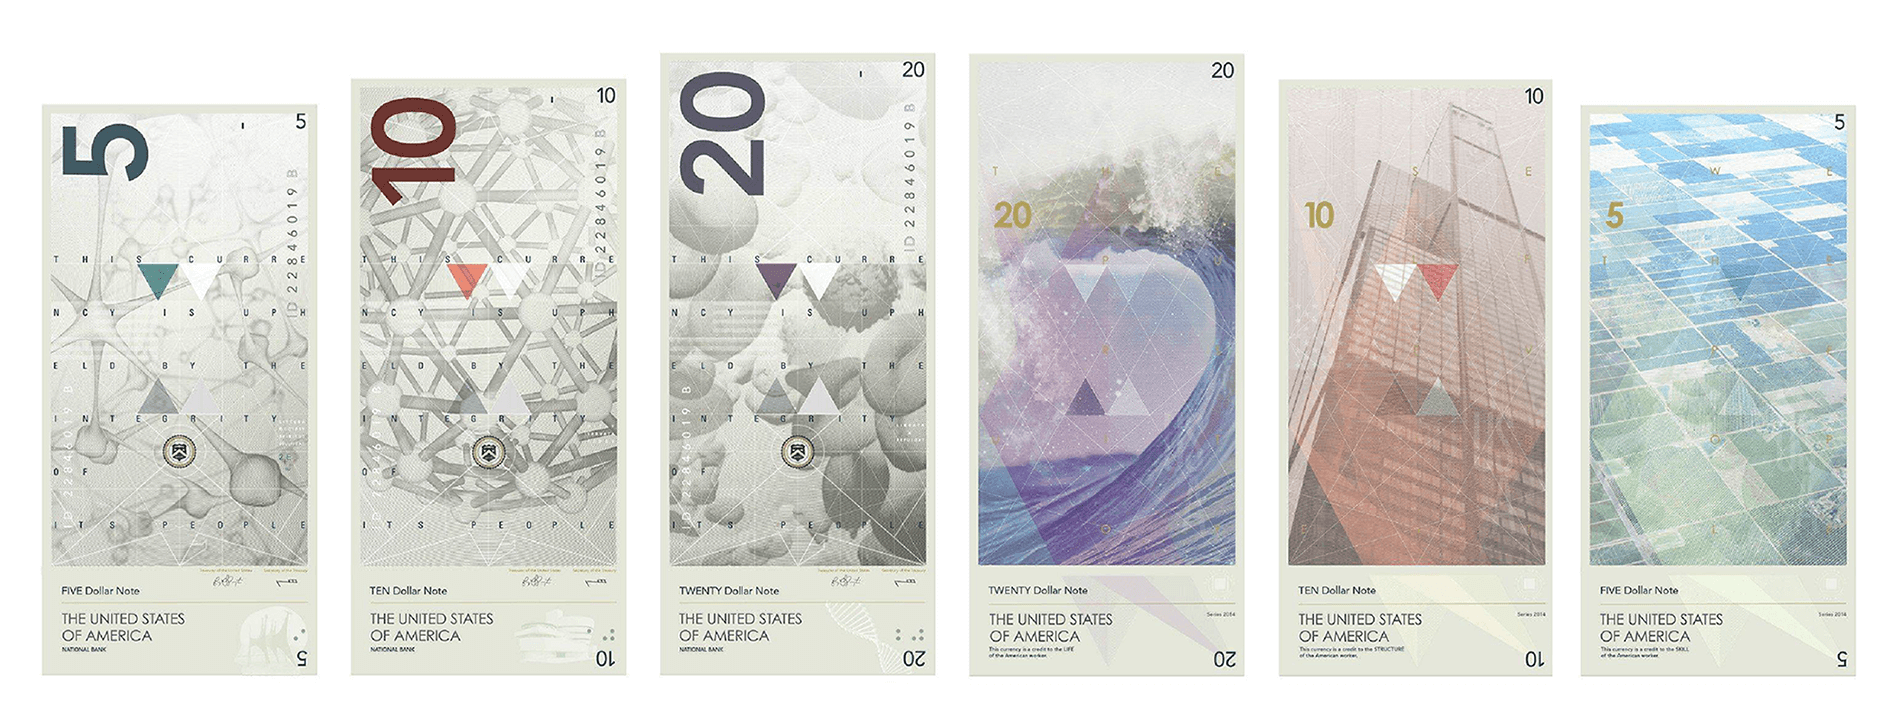 Design concept for US currency